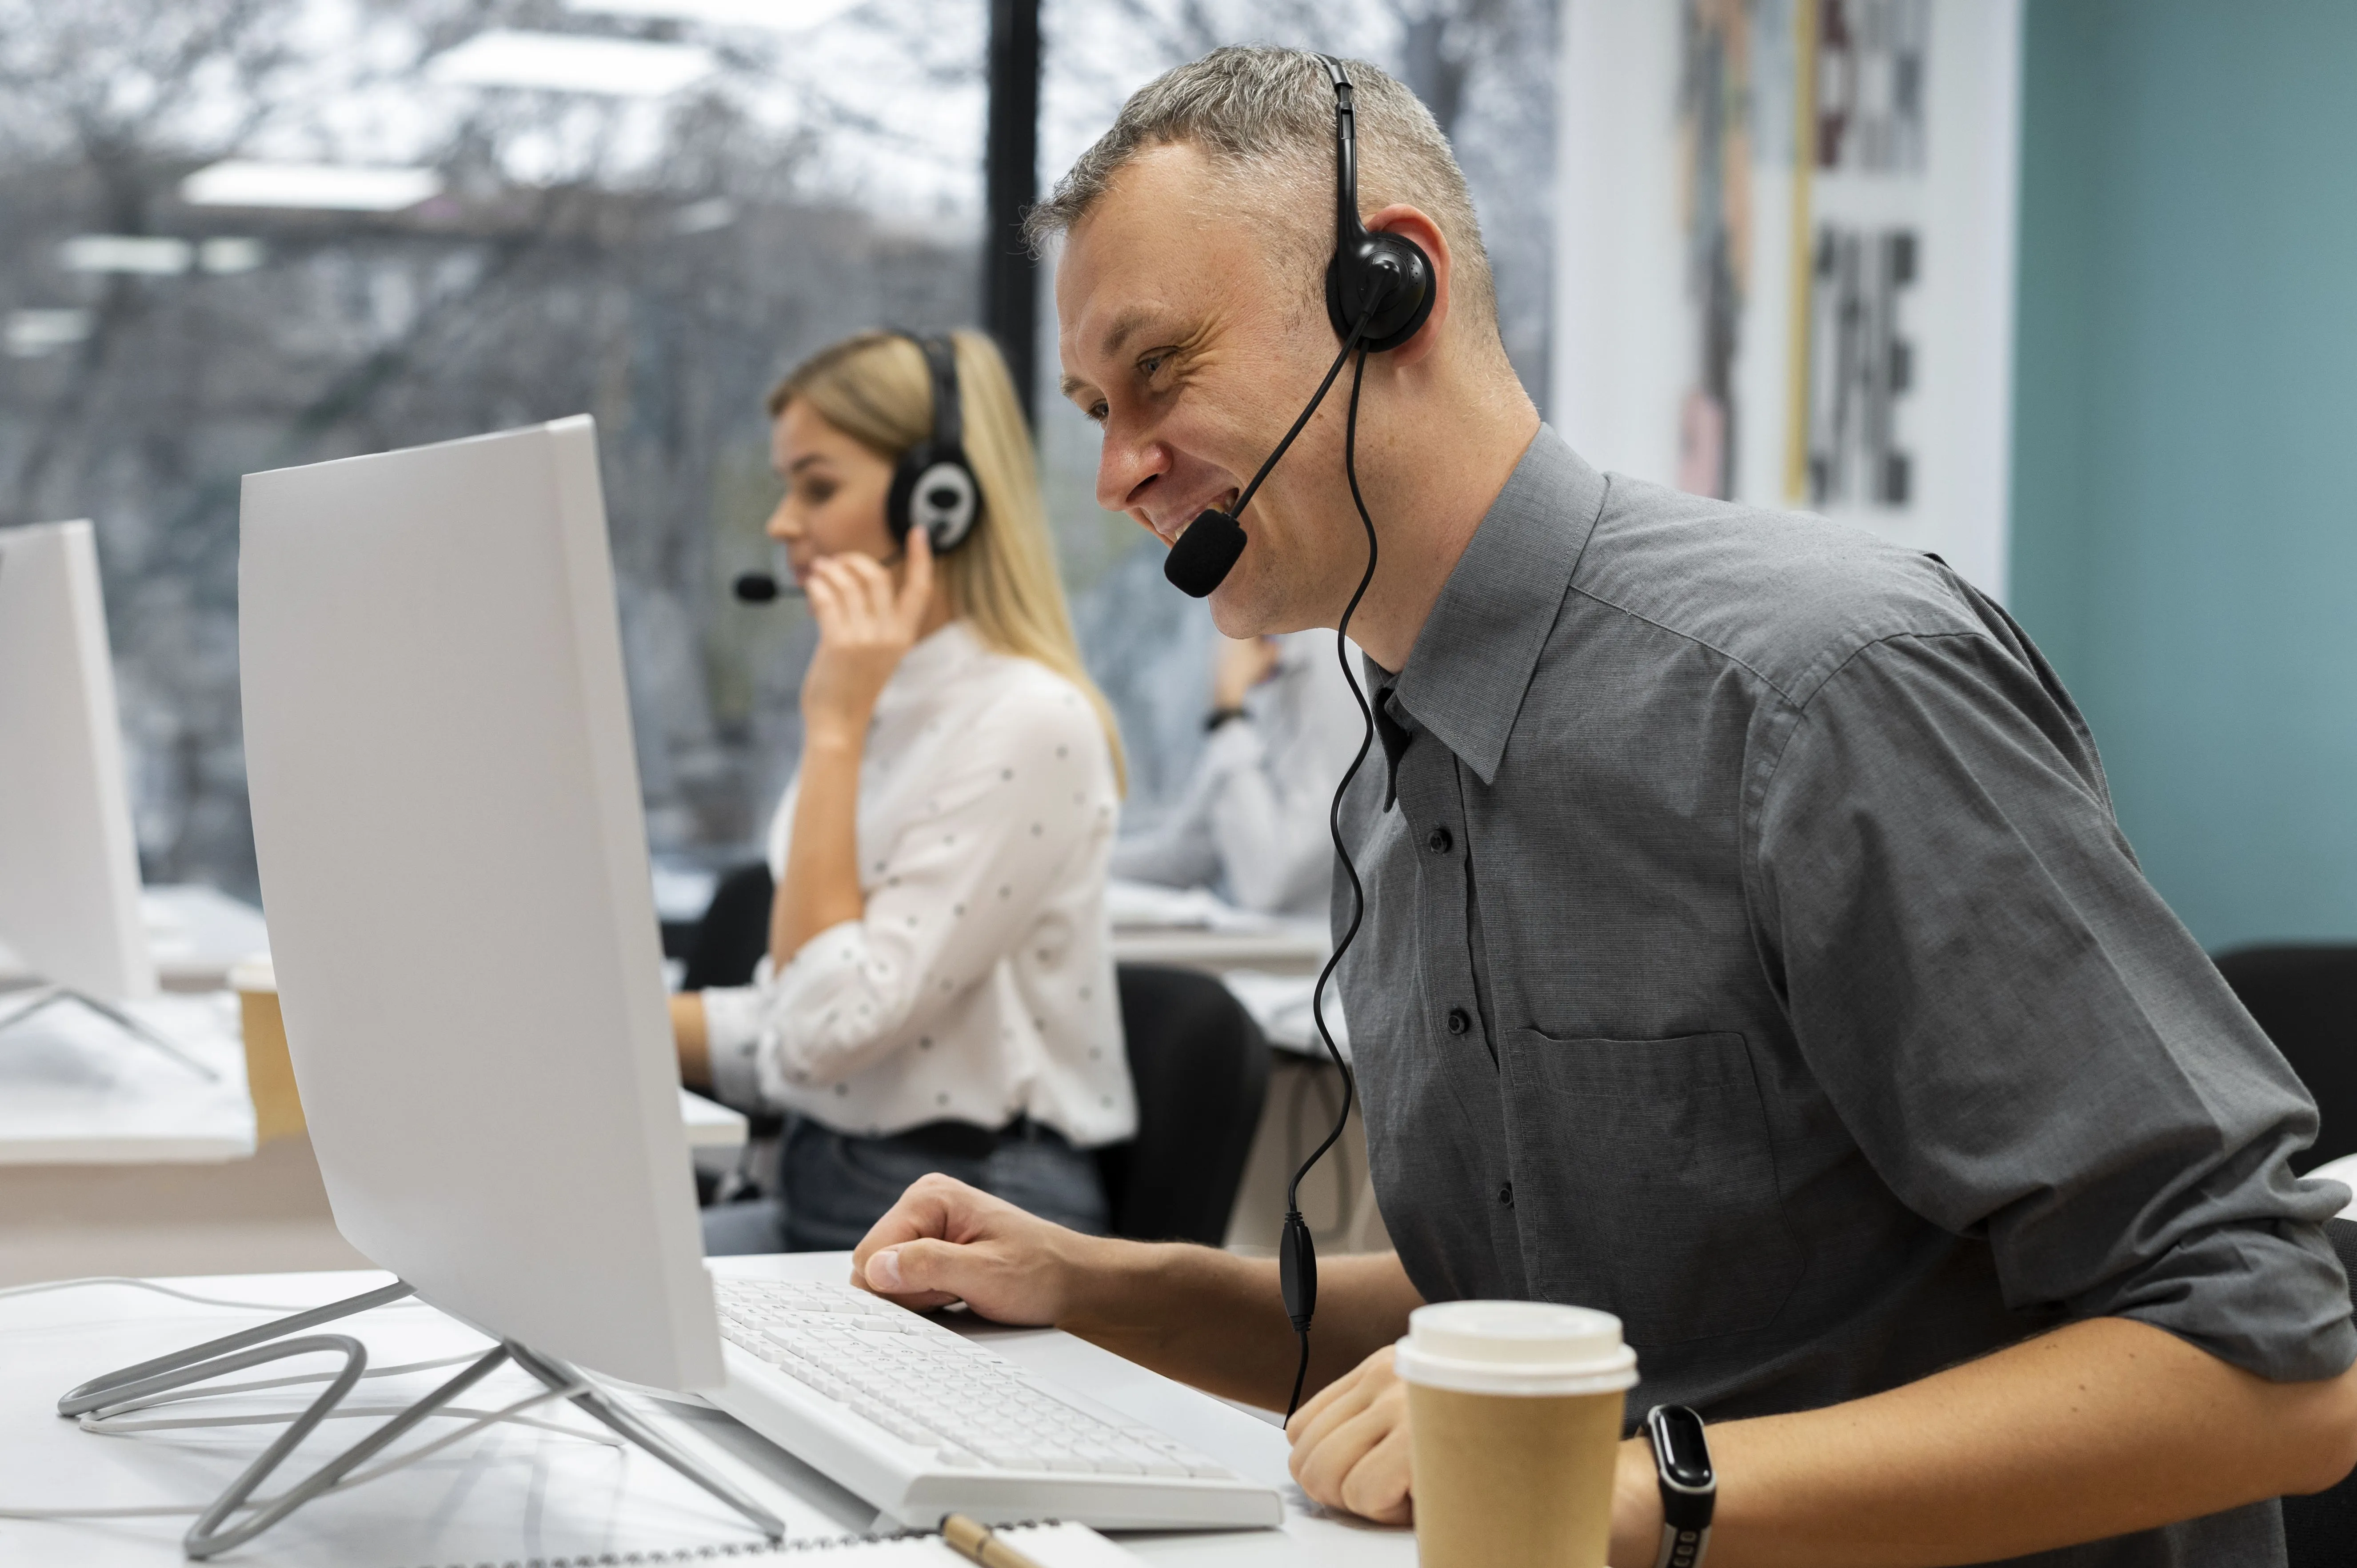 colleagues working together call center office with coffee